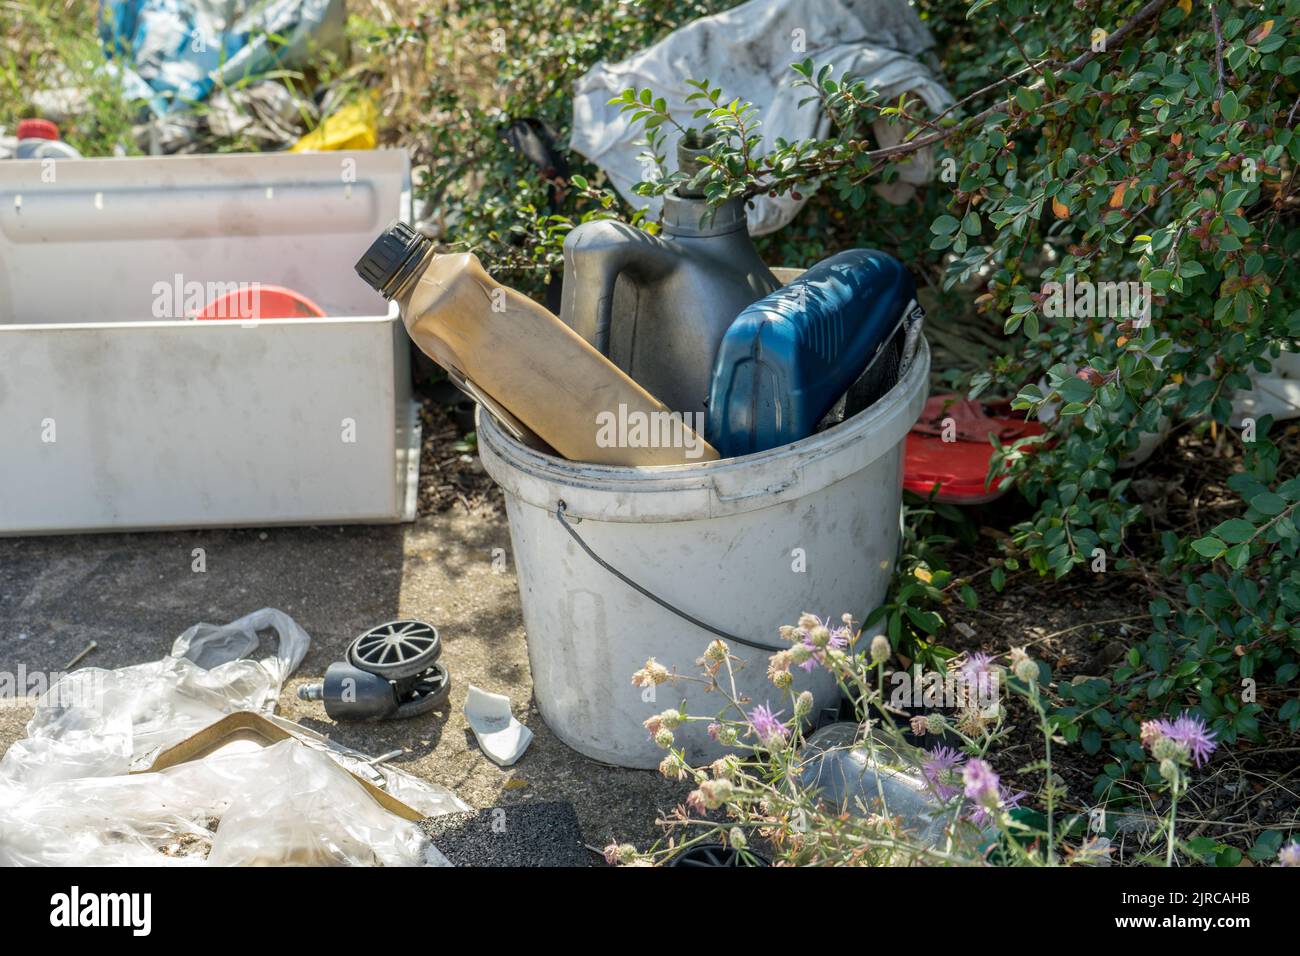 in nature Illegal dumped garbage Stock Photo